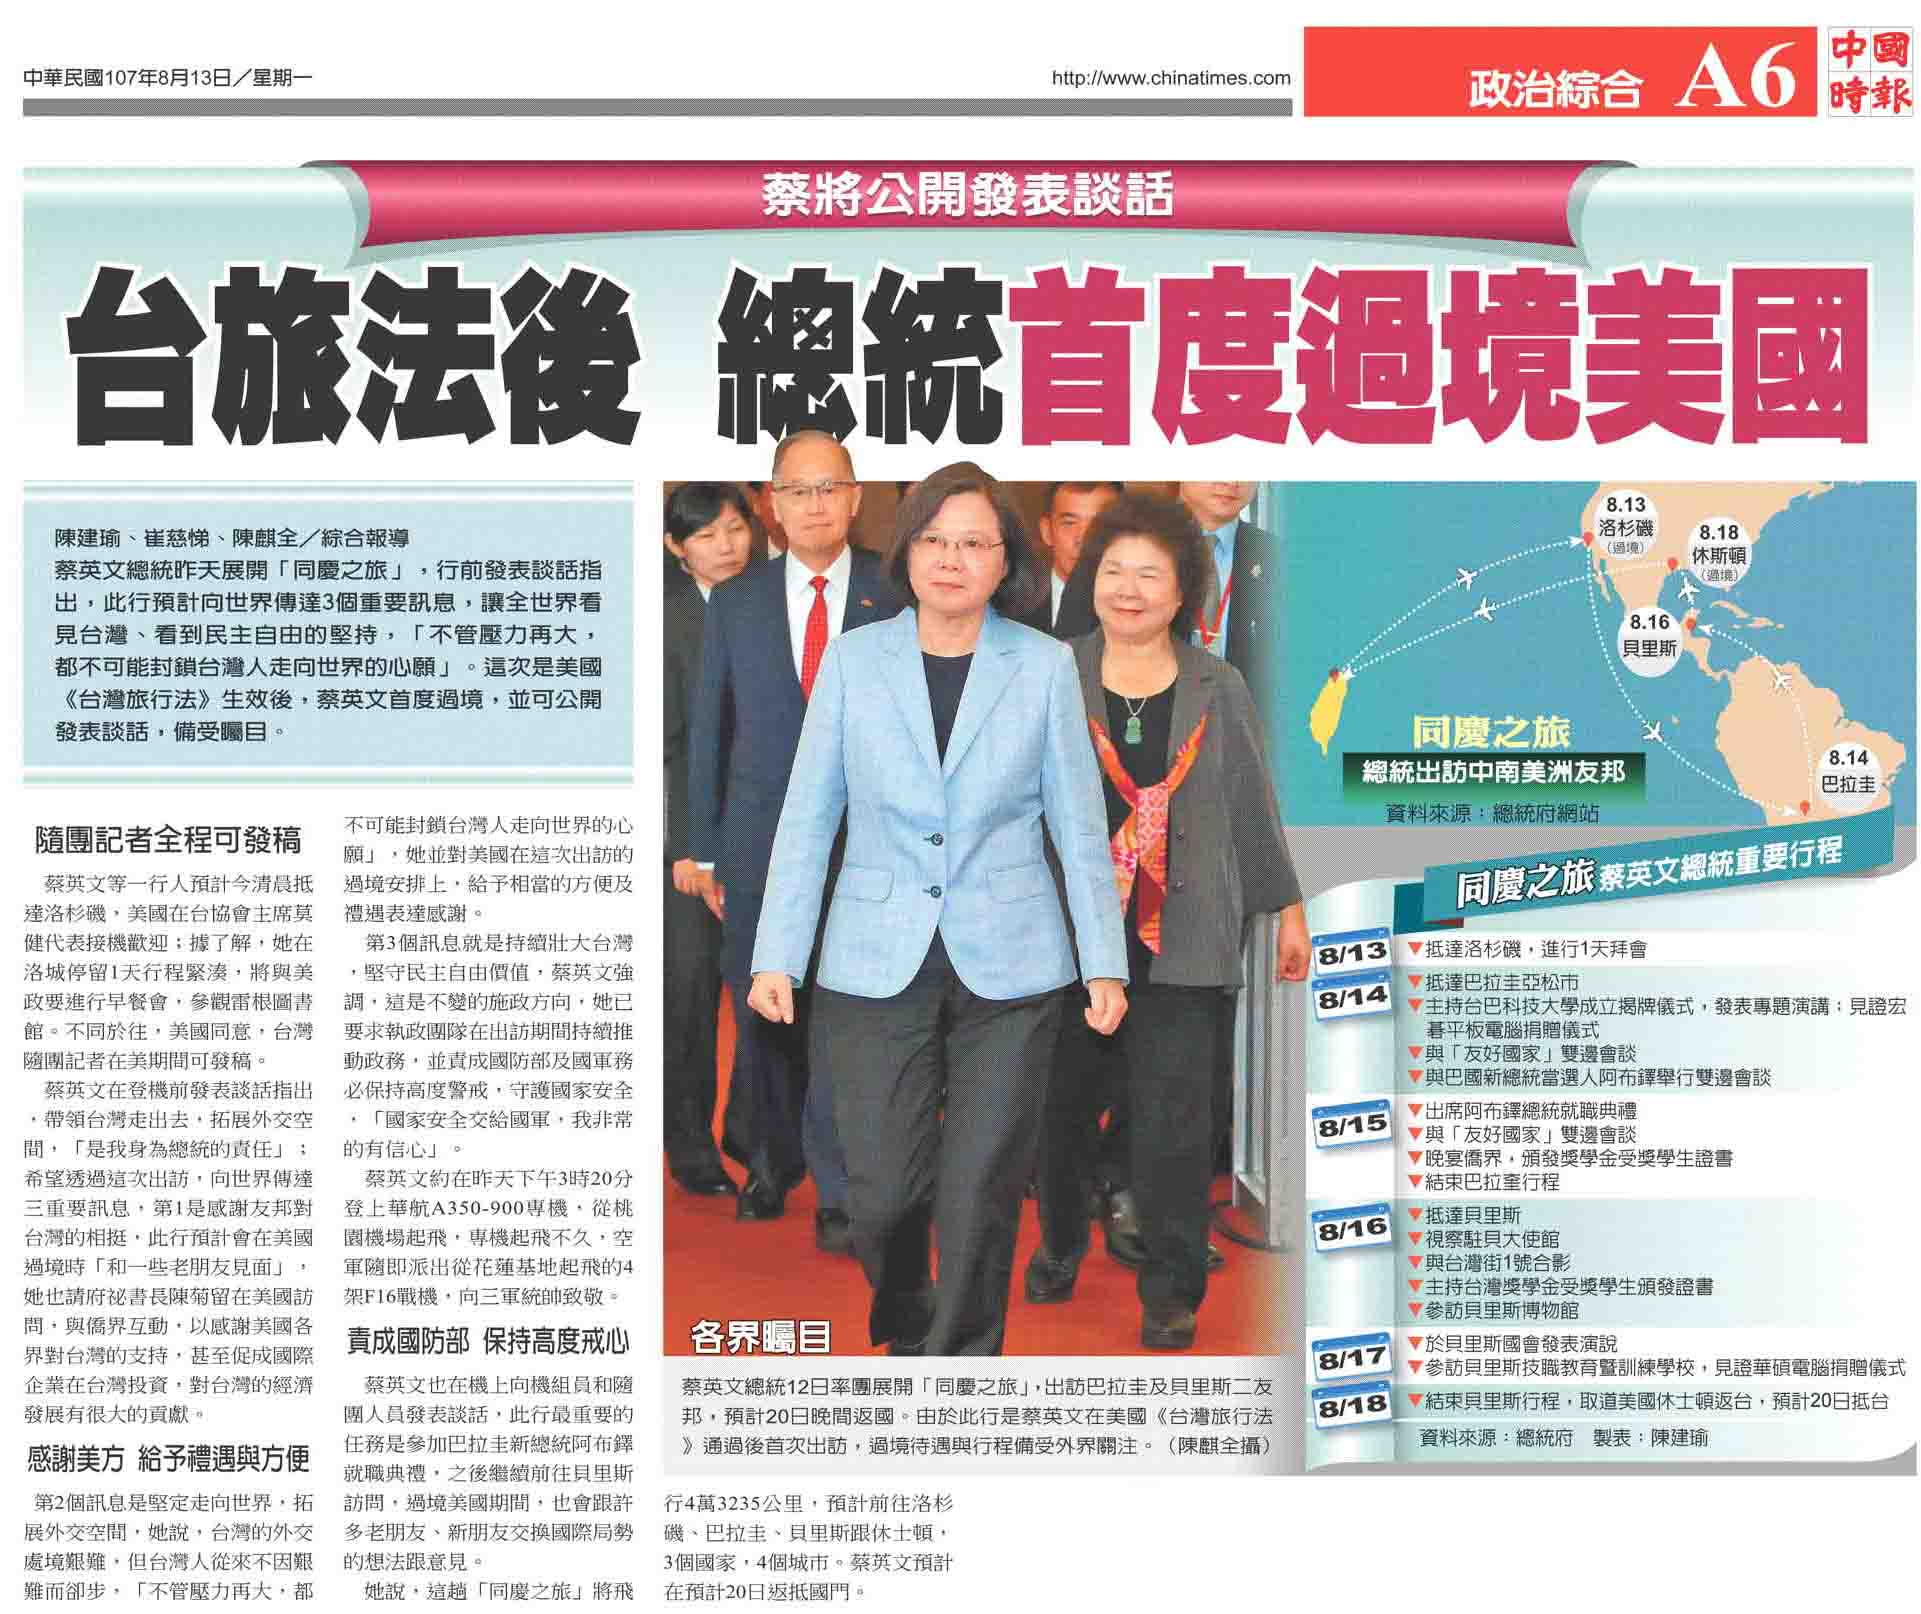 President Tsai's first US stopover following passage of the Taiwan Travel Act